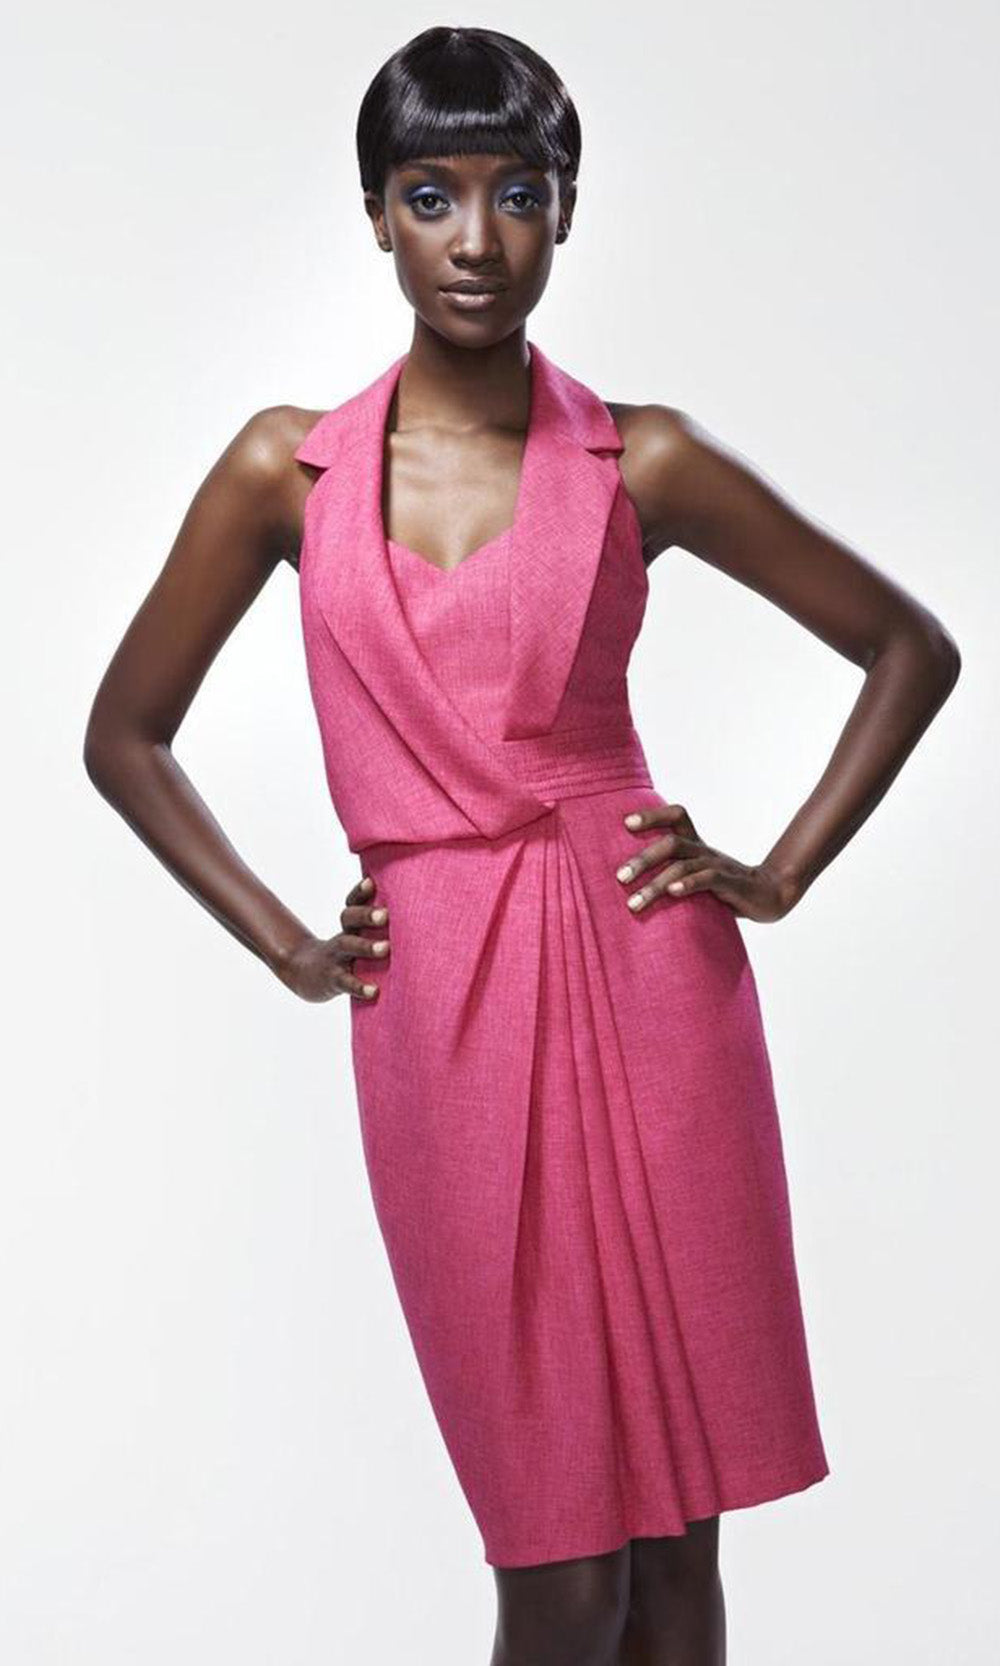 Theia - 870033 Collared Neck Cocktail Dress - 1 pc Fuchsia In Size 4 Available CCSALE 4 / Fuchsia